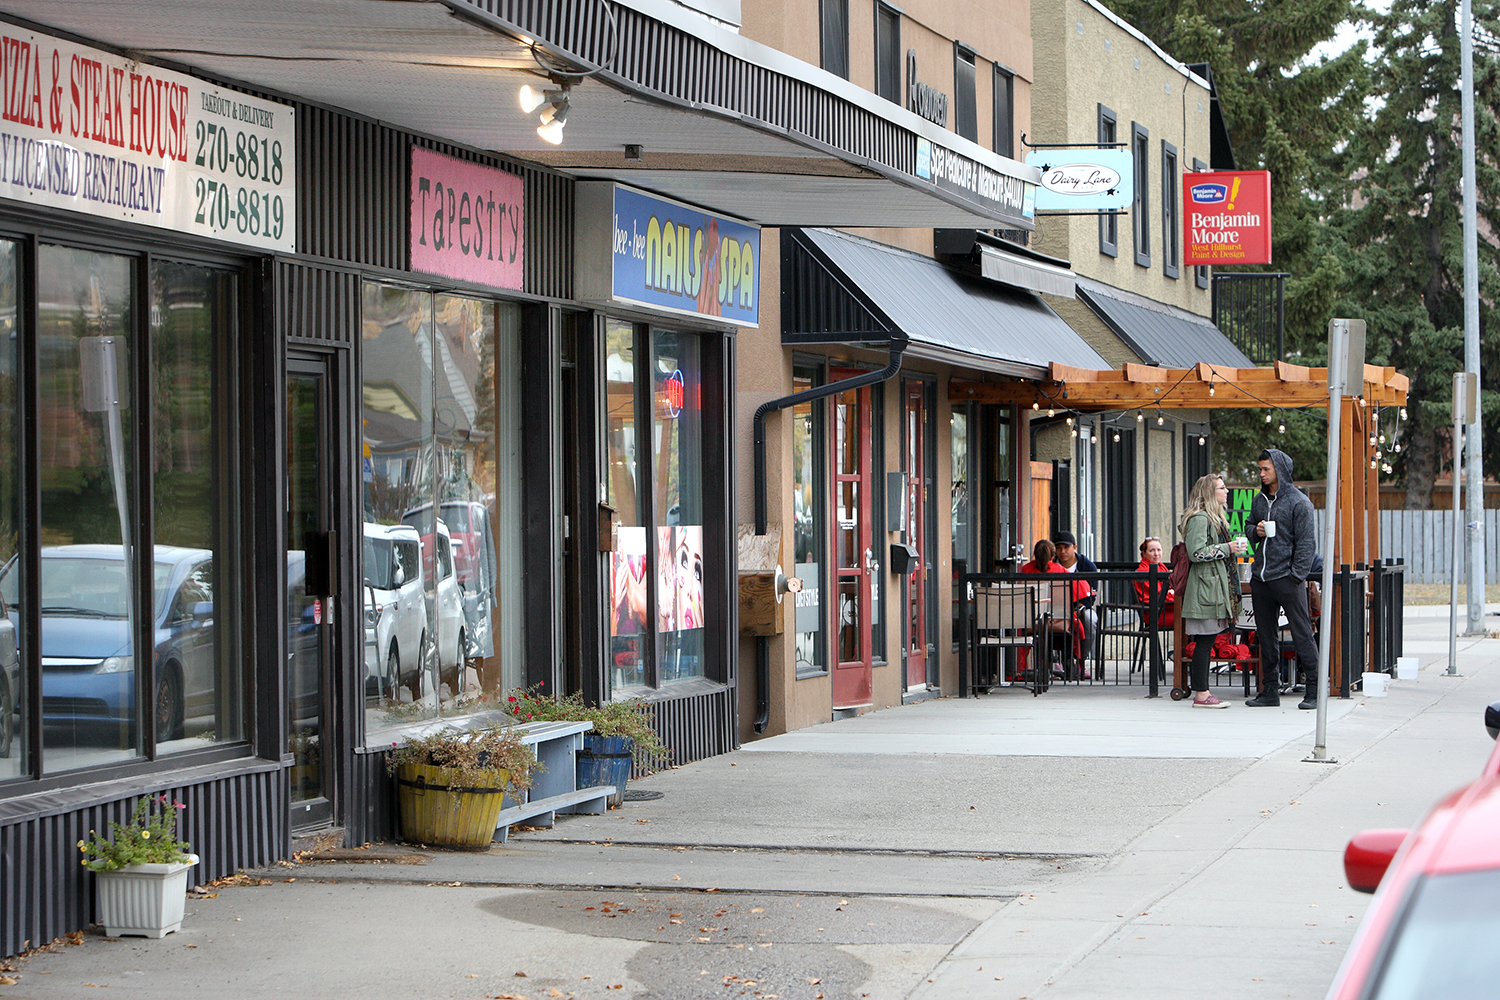 19th Street N.W. in West Hillhurst is dotted with funky coffee shops and eateries.
Wil Andruschak / For CREB®Now